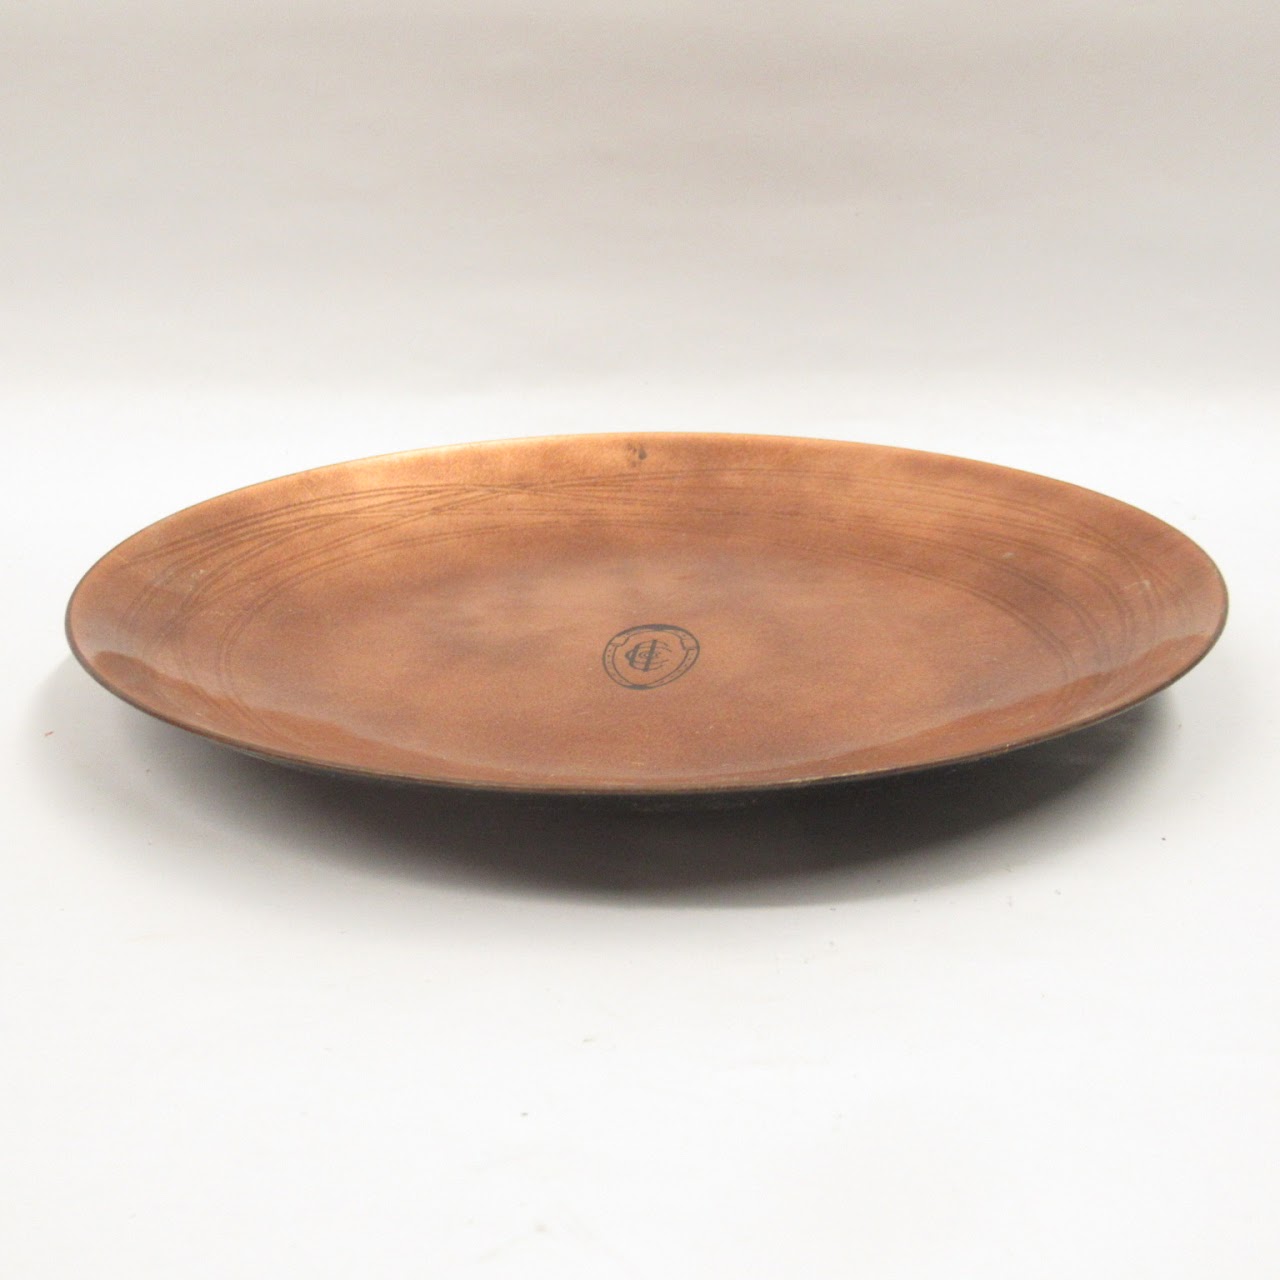 Inspiration Consolidated Copper Enameled Vintage Plate